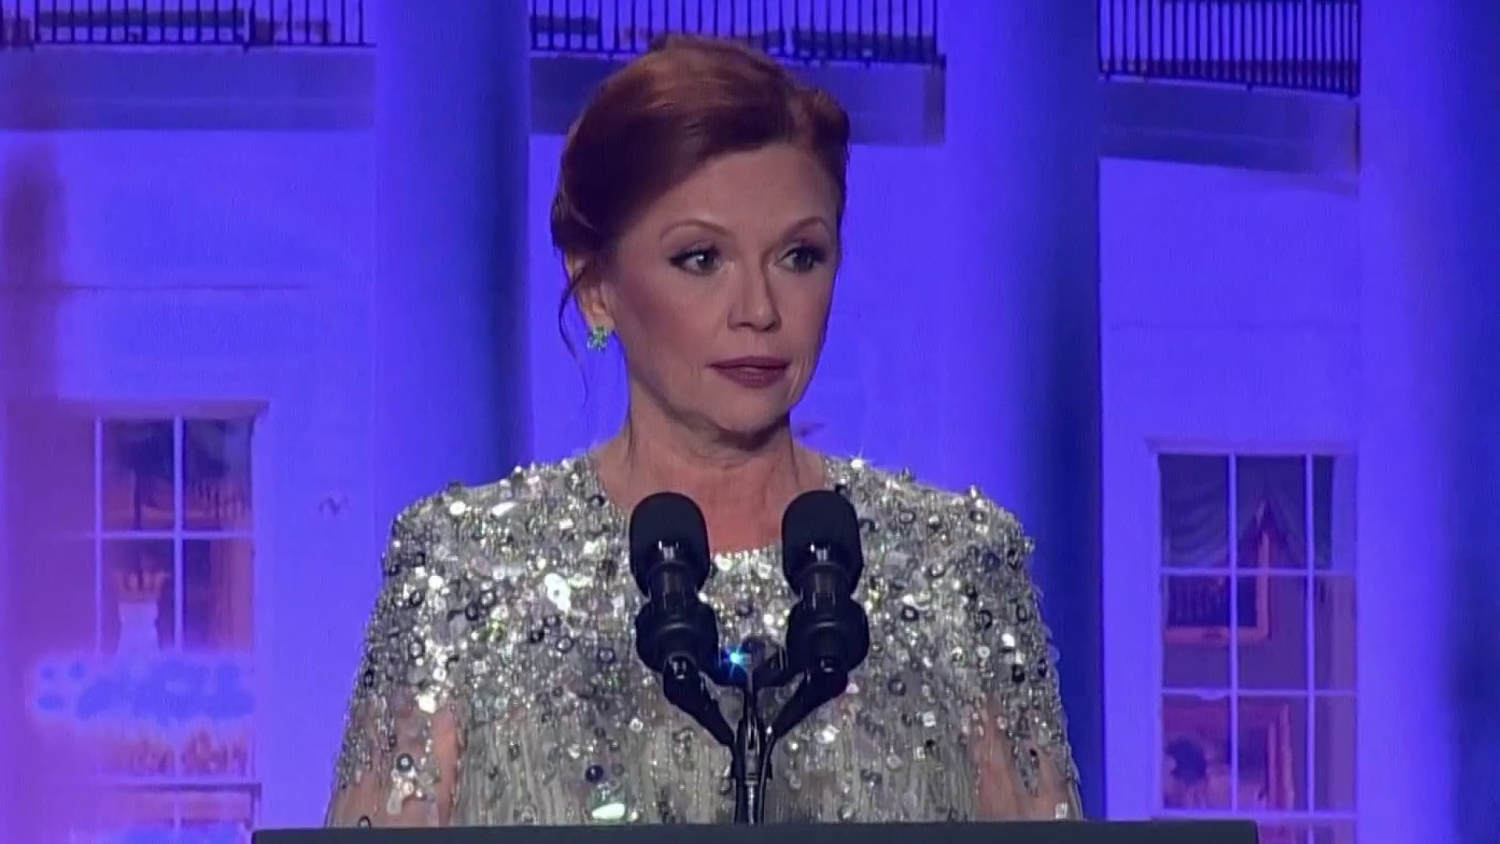 ‘We preserve the historical record’: Kelly O’Donnell highlights importance of free press during WHCD